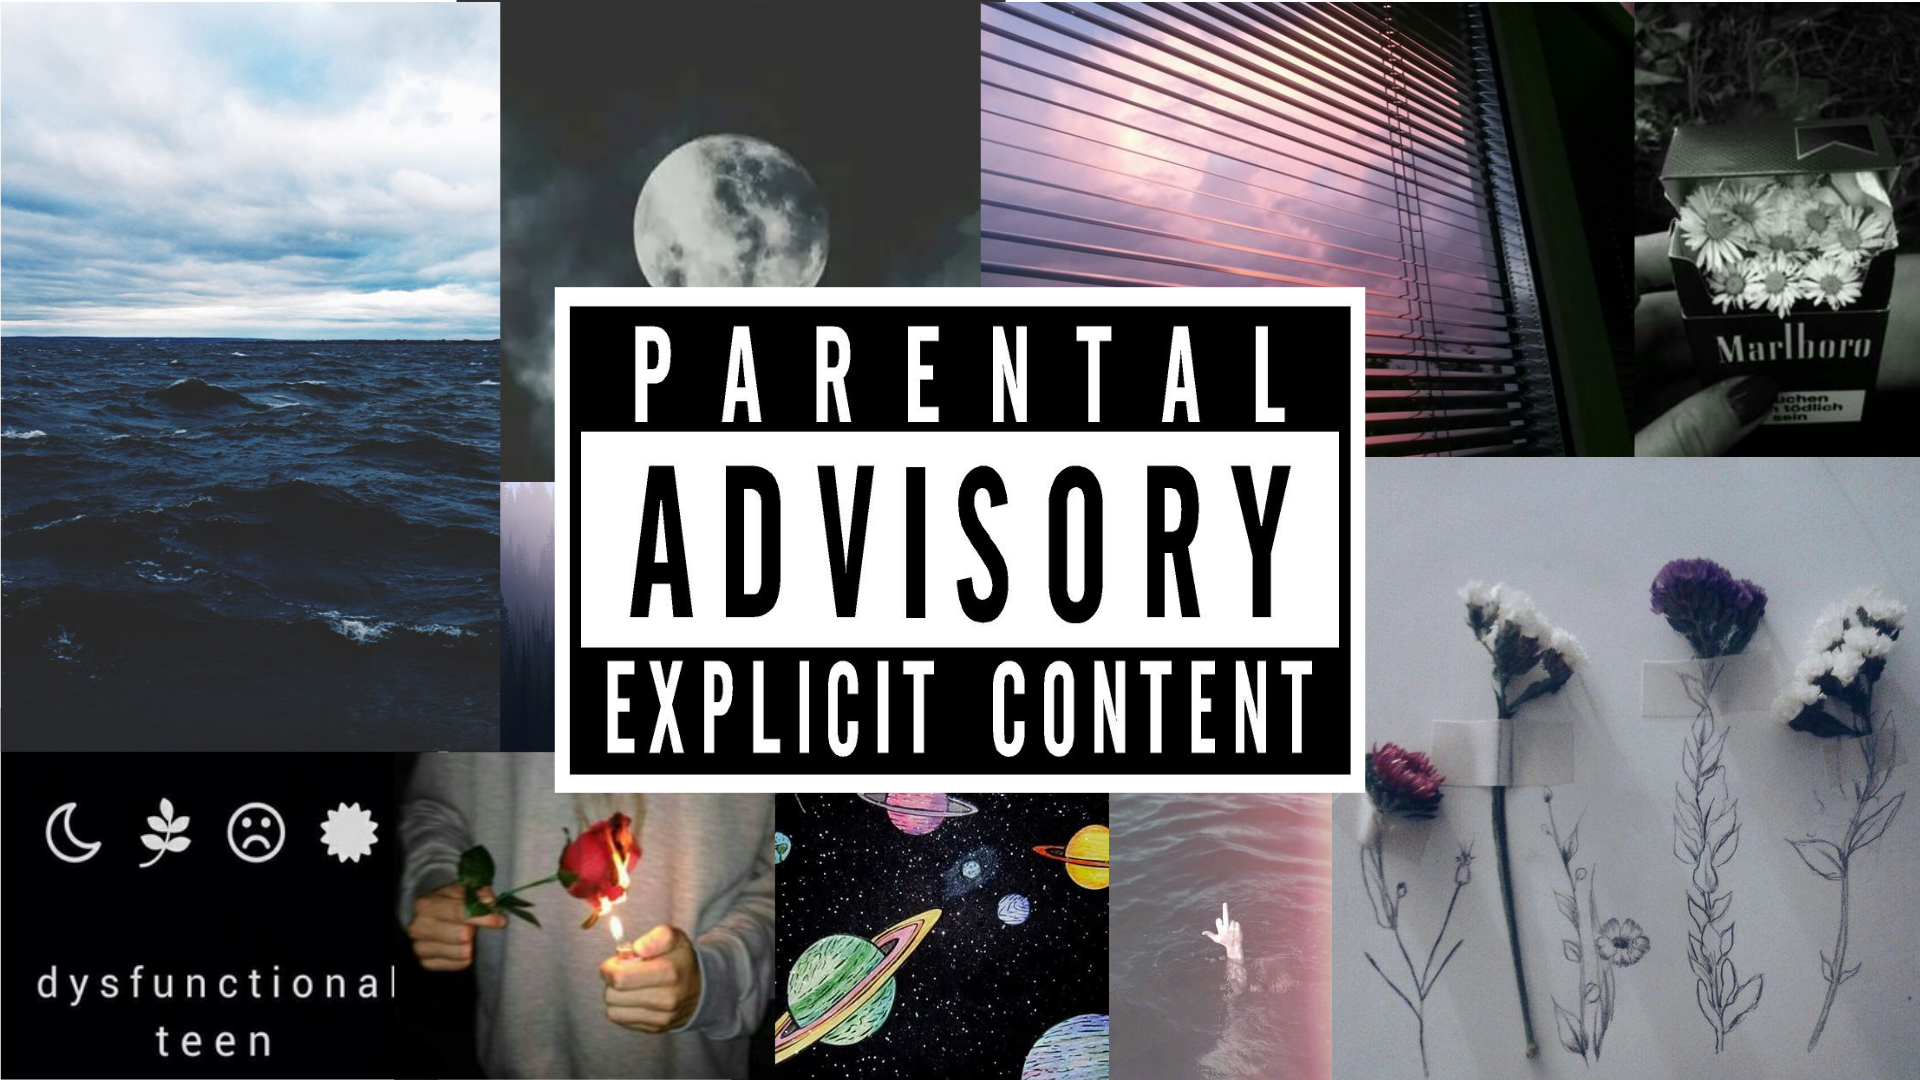 A collage of tumblr vibes with the parental advisory logo